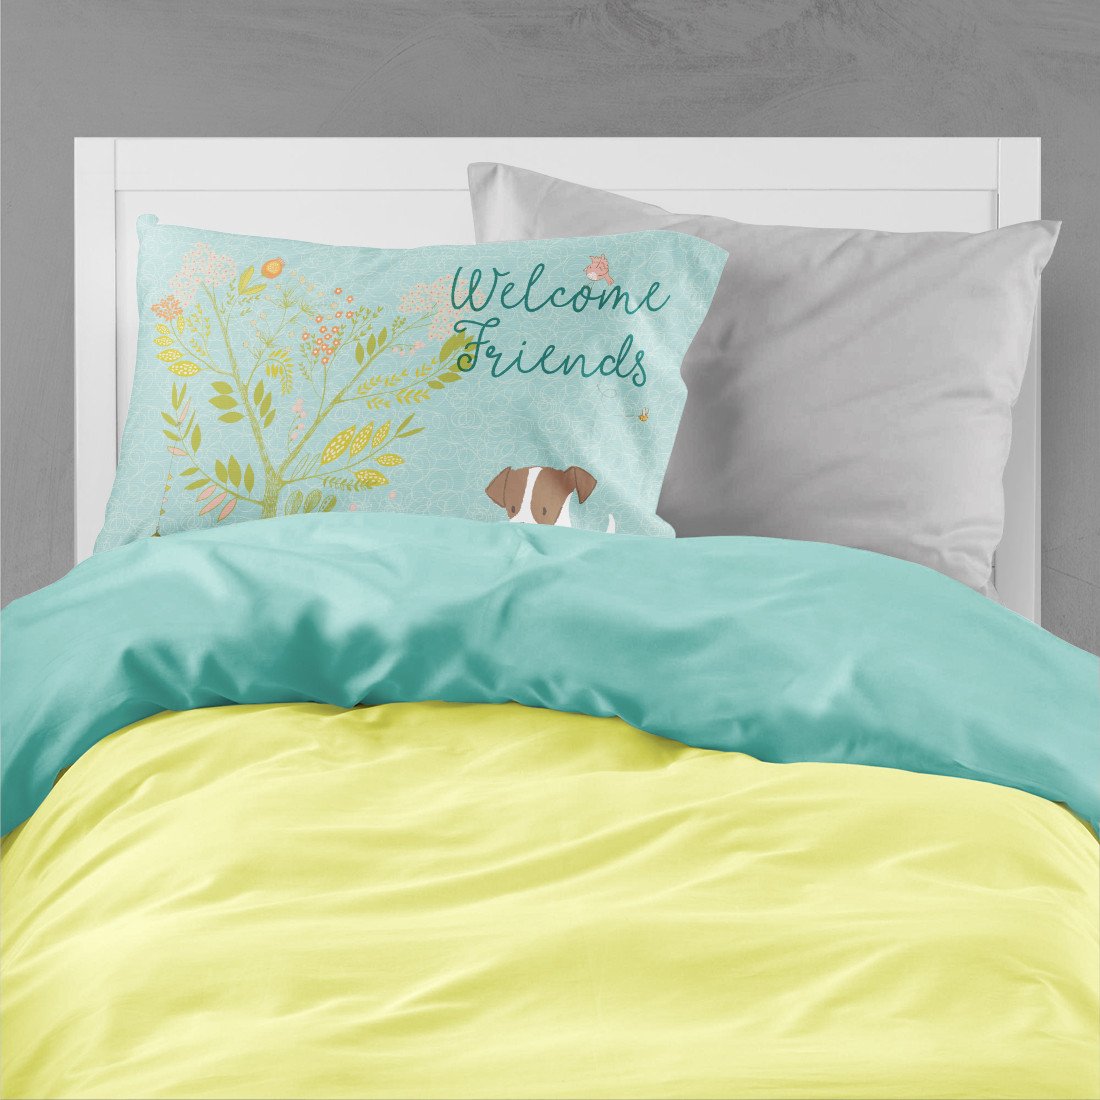 Welcome Friends Jack Russell Terrier Puppy Fabric Standard Pillowcase BB7638PILLOWCASE by Caroline's Treasures